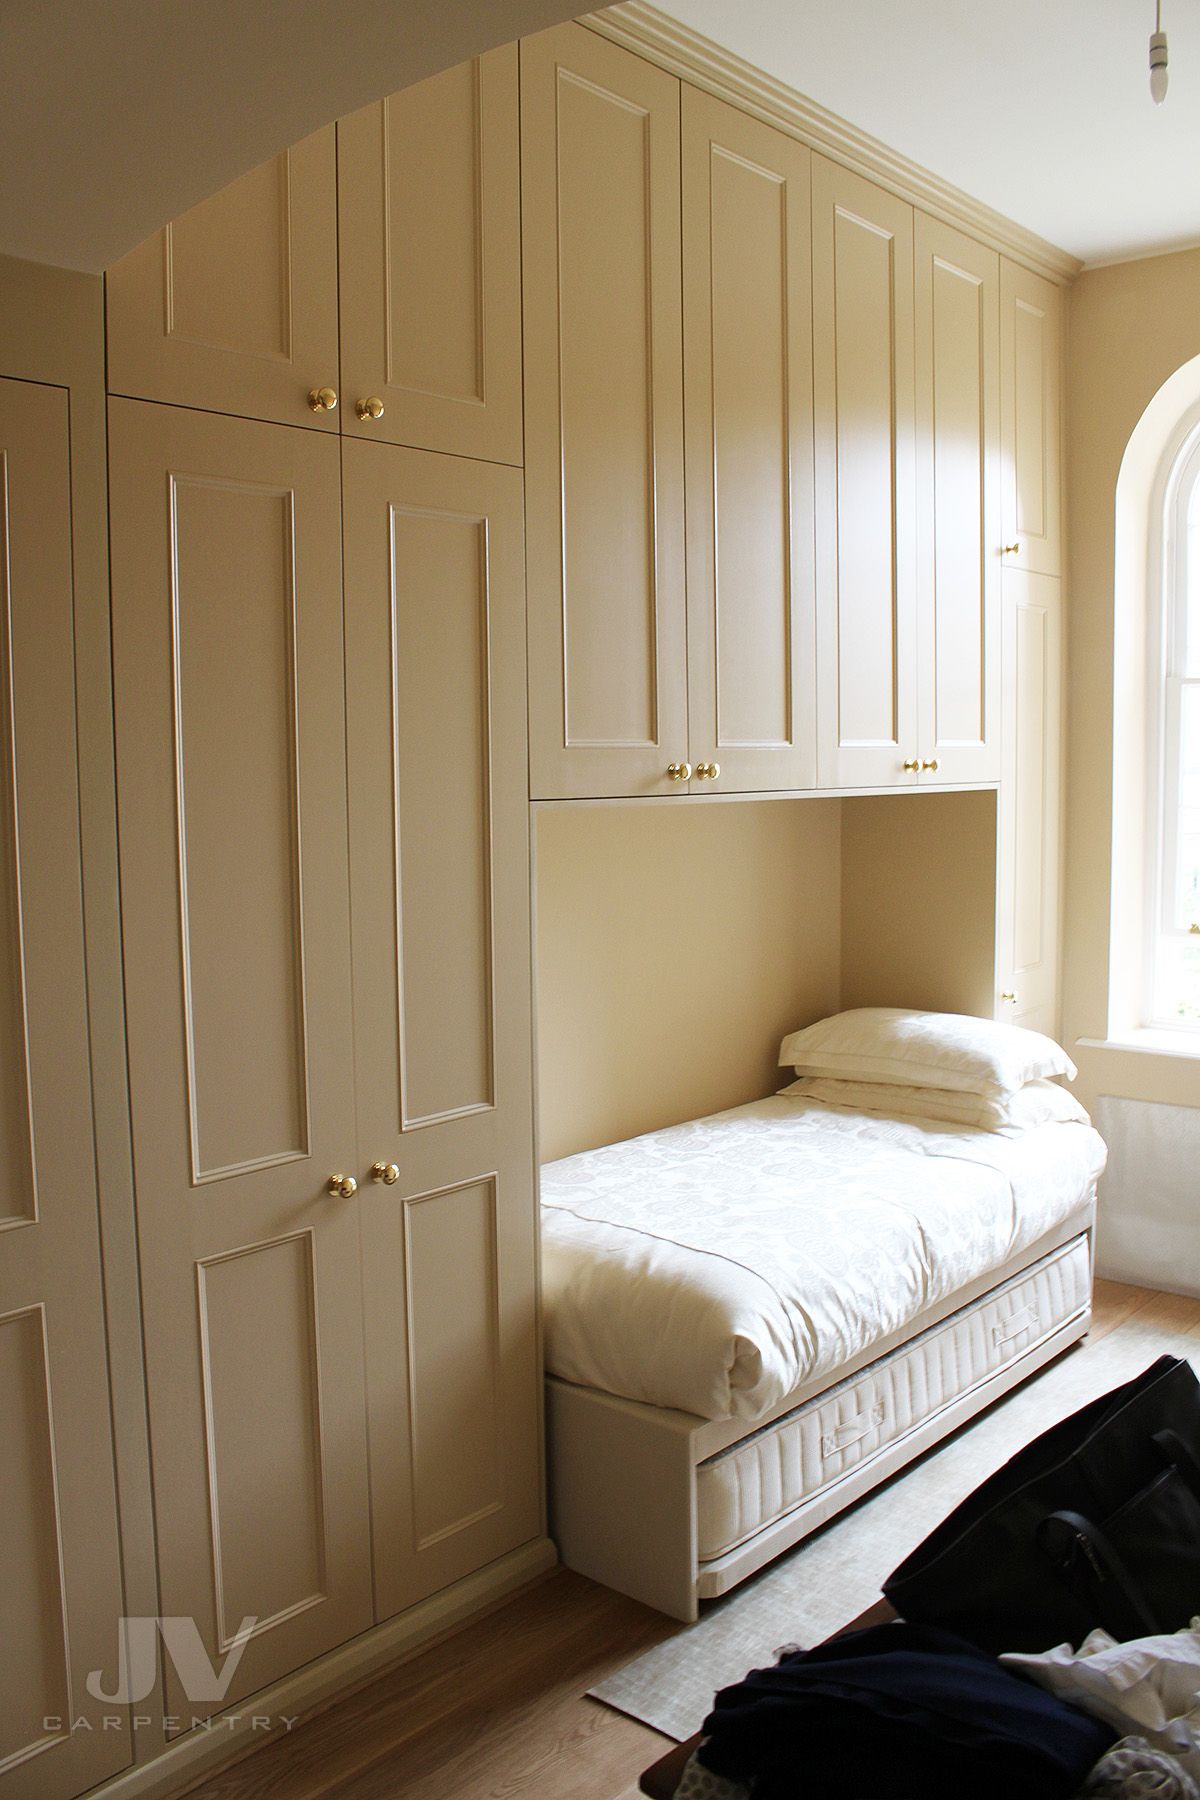 12 Fitted Wardrobes Over Bed Ideas For Your Bedroom | Jv Carpentry Throughout Over Bed Wardrobes Units (View 15 of 15)